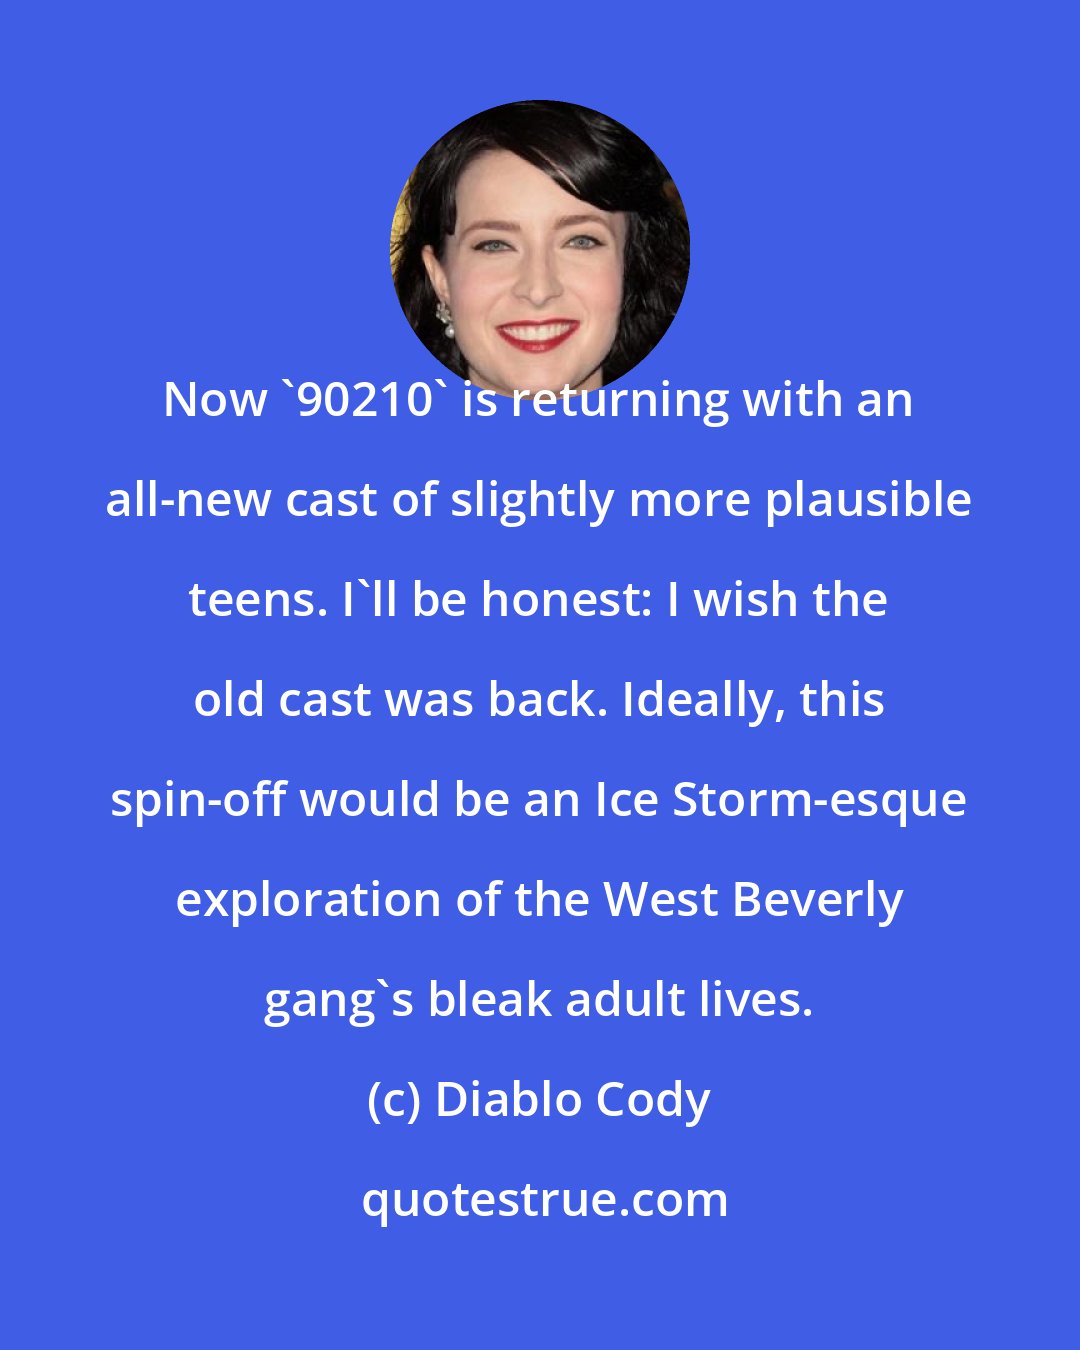 Diablo Cody: Now '90210' is returning with an all-new cast of slightly more plausible teens. I'll be honest: I wish the old cast was back. Ideally, this spin-off would be an Ice Storm-esque exploration of the West Beverly gang's bleak adult lives.